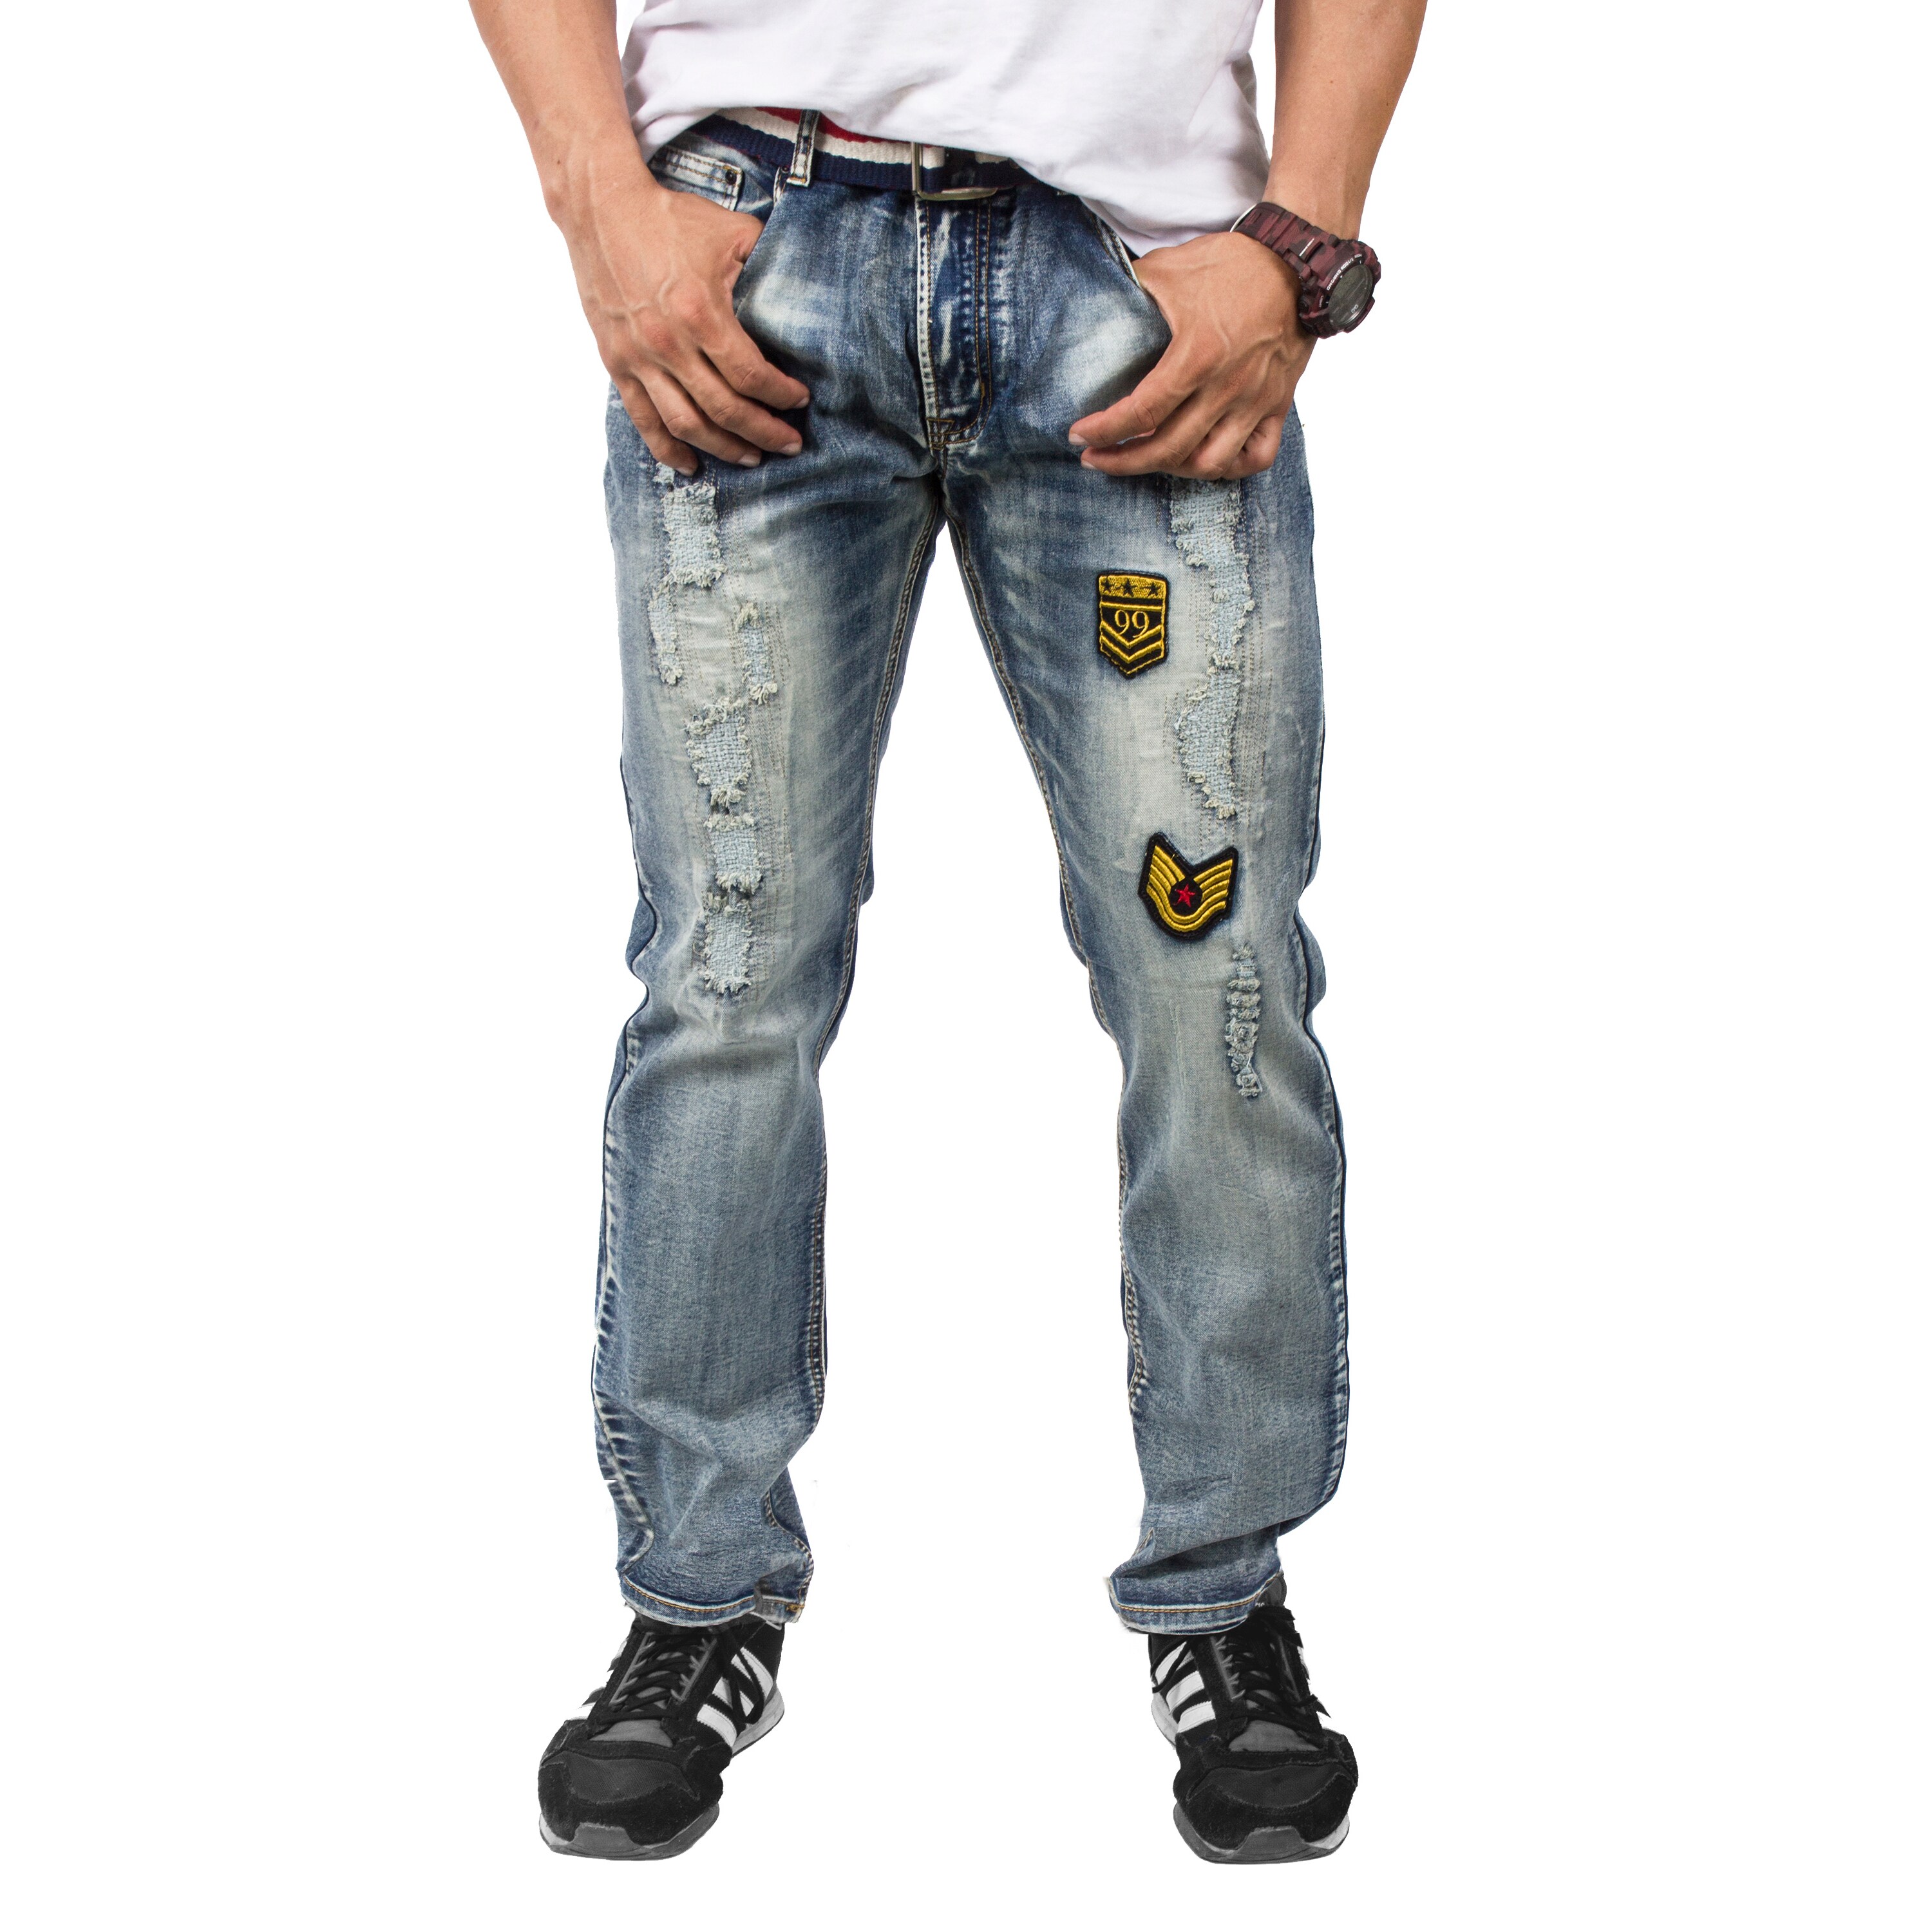 rocawear jeans price